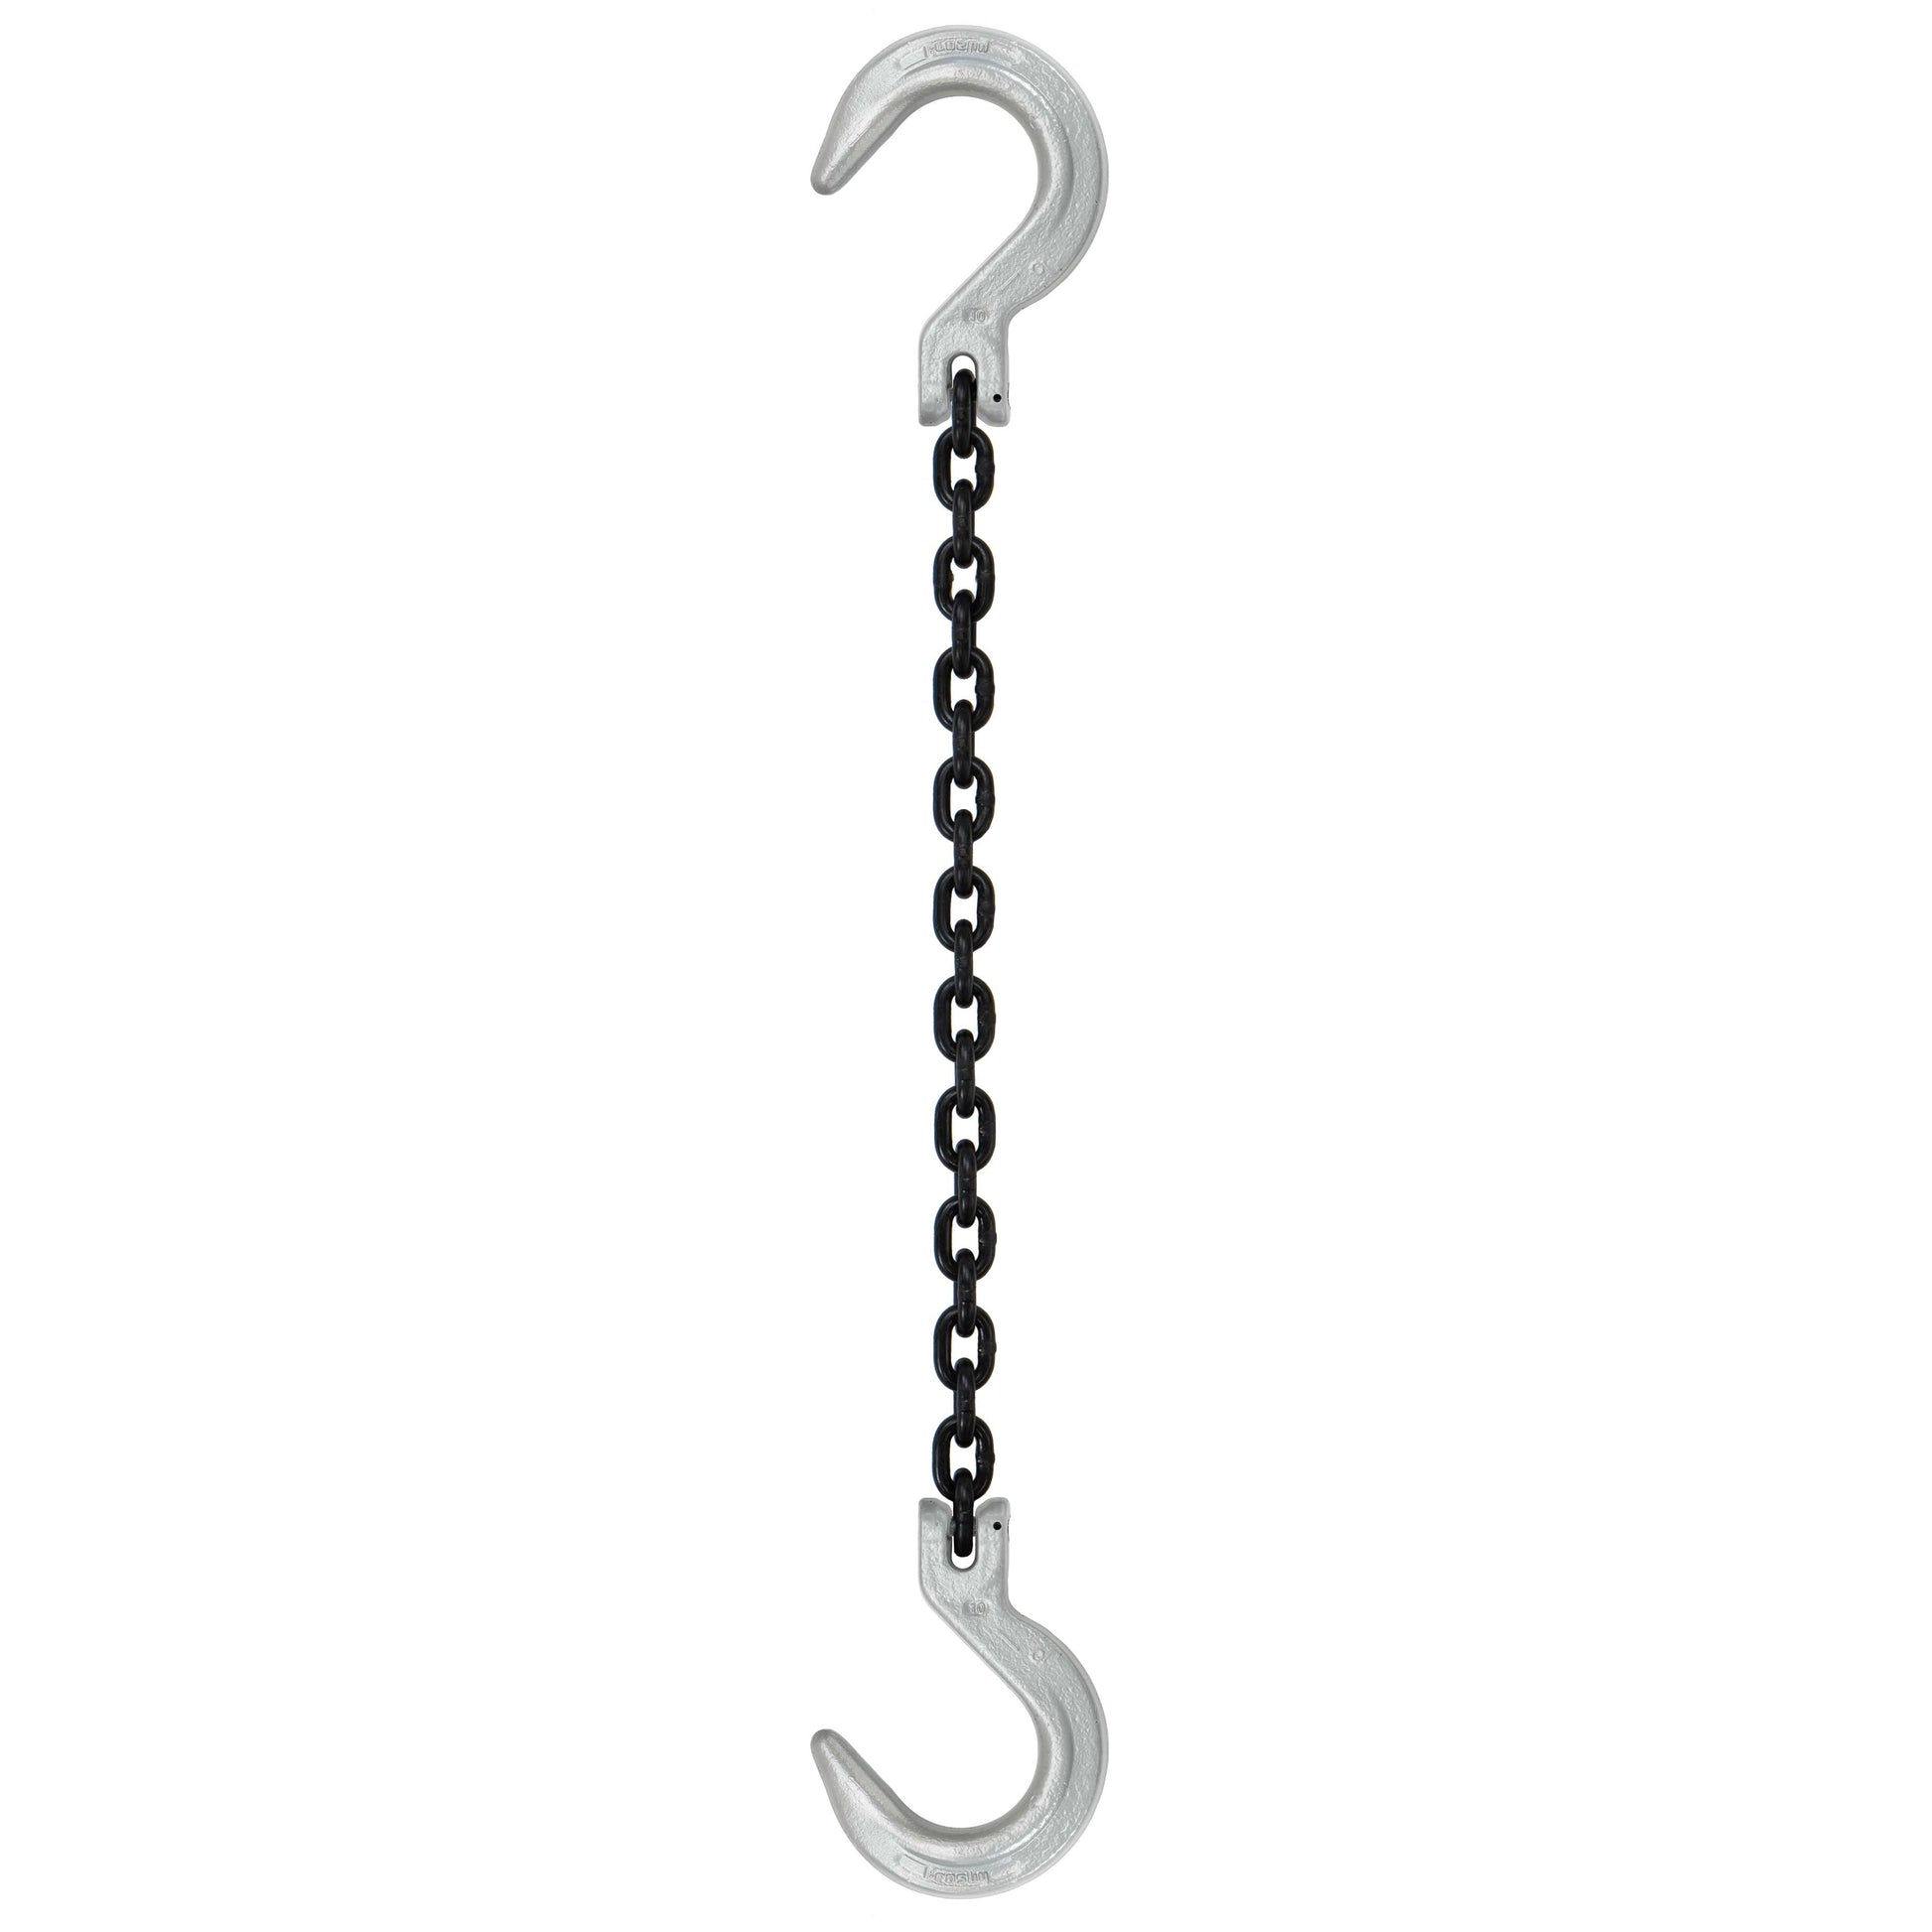 12 inch x 18 foot Domestic Single Leg Chain Sling w Crosby Foundry & Foundry Hooks Grade 100 image 1 of 2